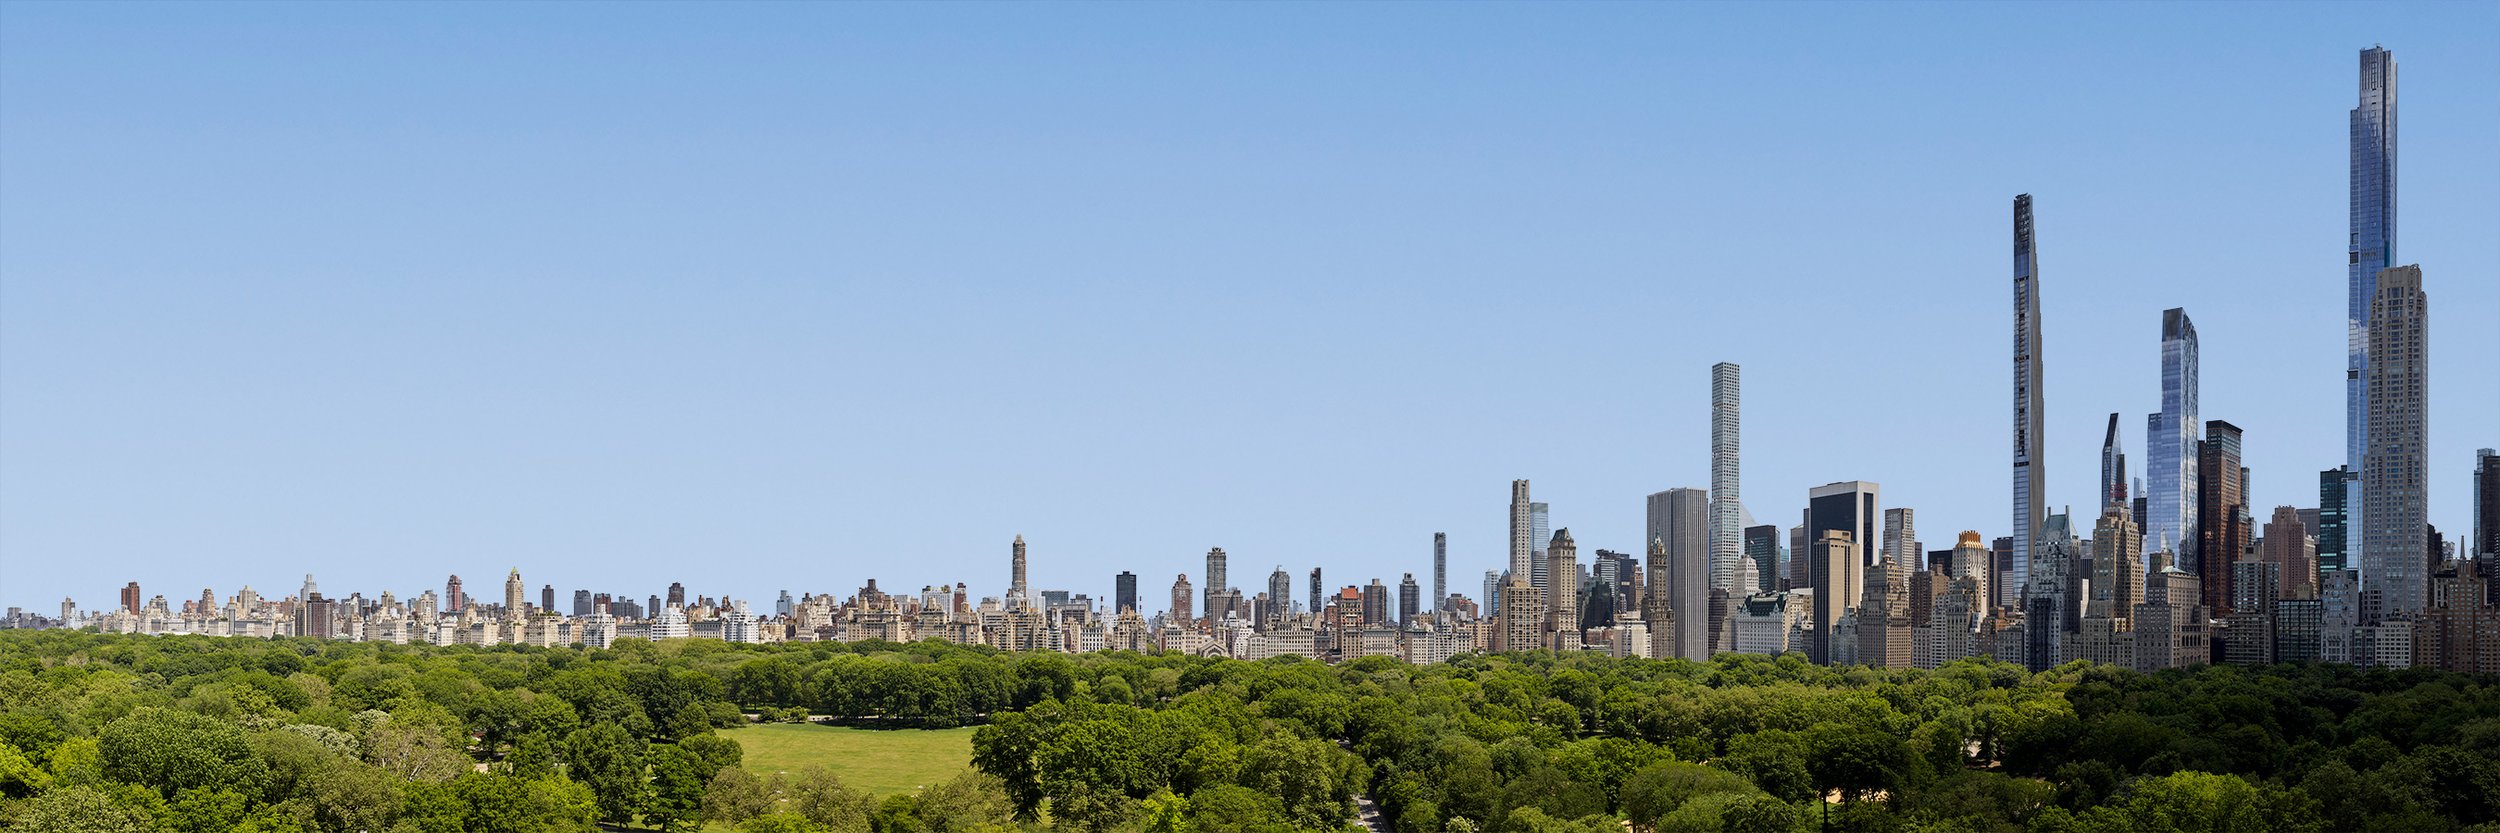 New-York-City-May-2021-Central-Park-West-Day.jpg